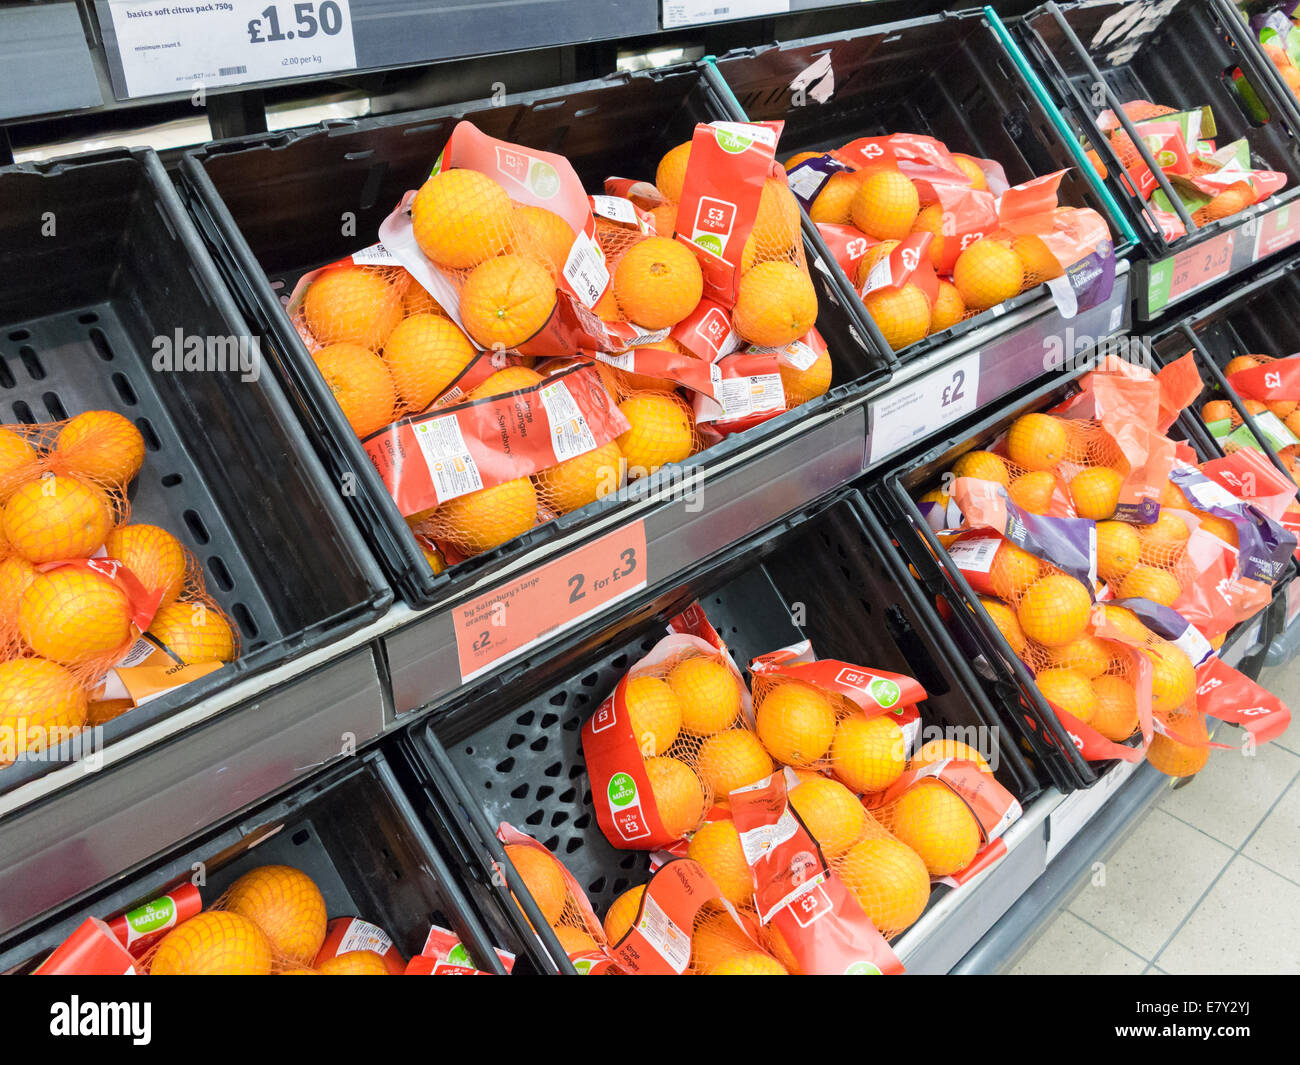 Oranges for sale in a supermarket, UK Stock Photo